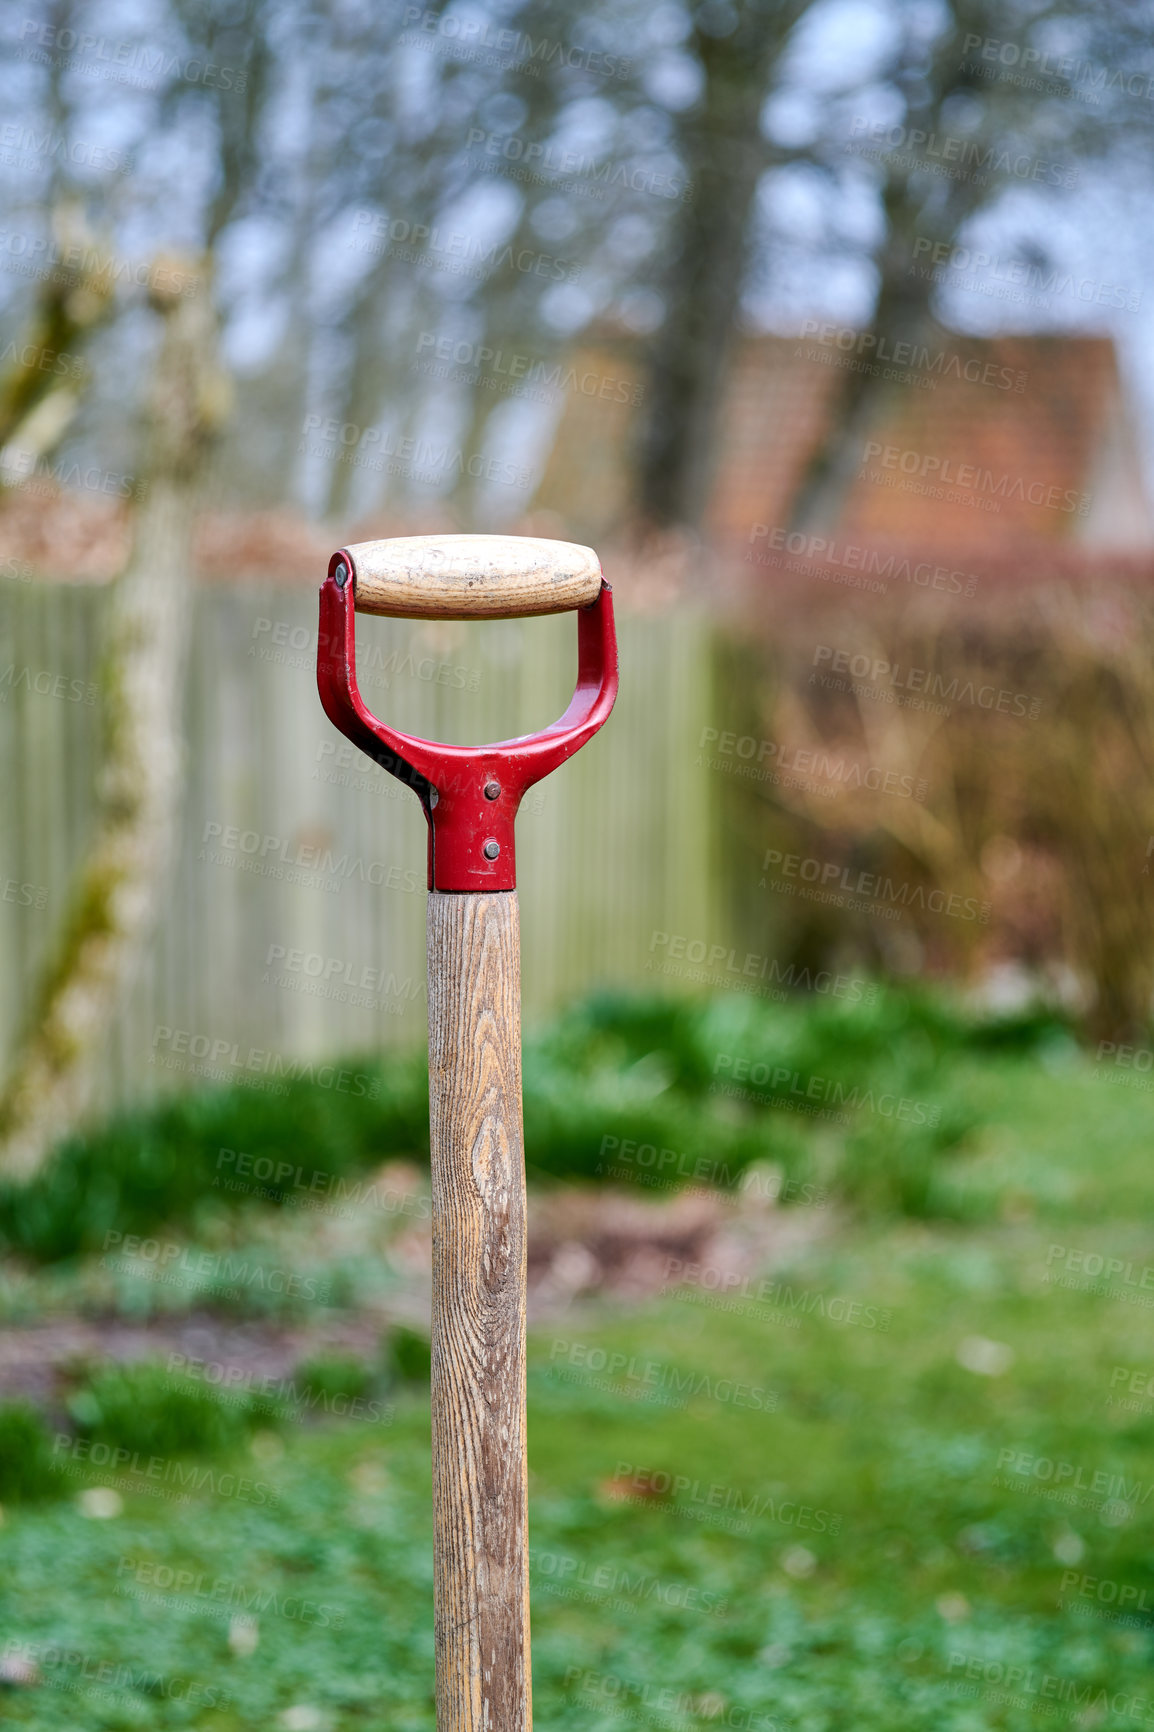 Buy stock photo Shovel in a green garden outdoors in a backyard of a house. Closeup of a wooden gardening tool or equipment outside in a yard with a fence and trees in the background. A spade stuck in the ground